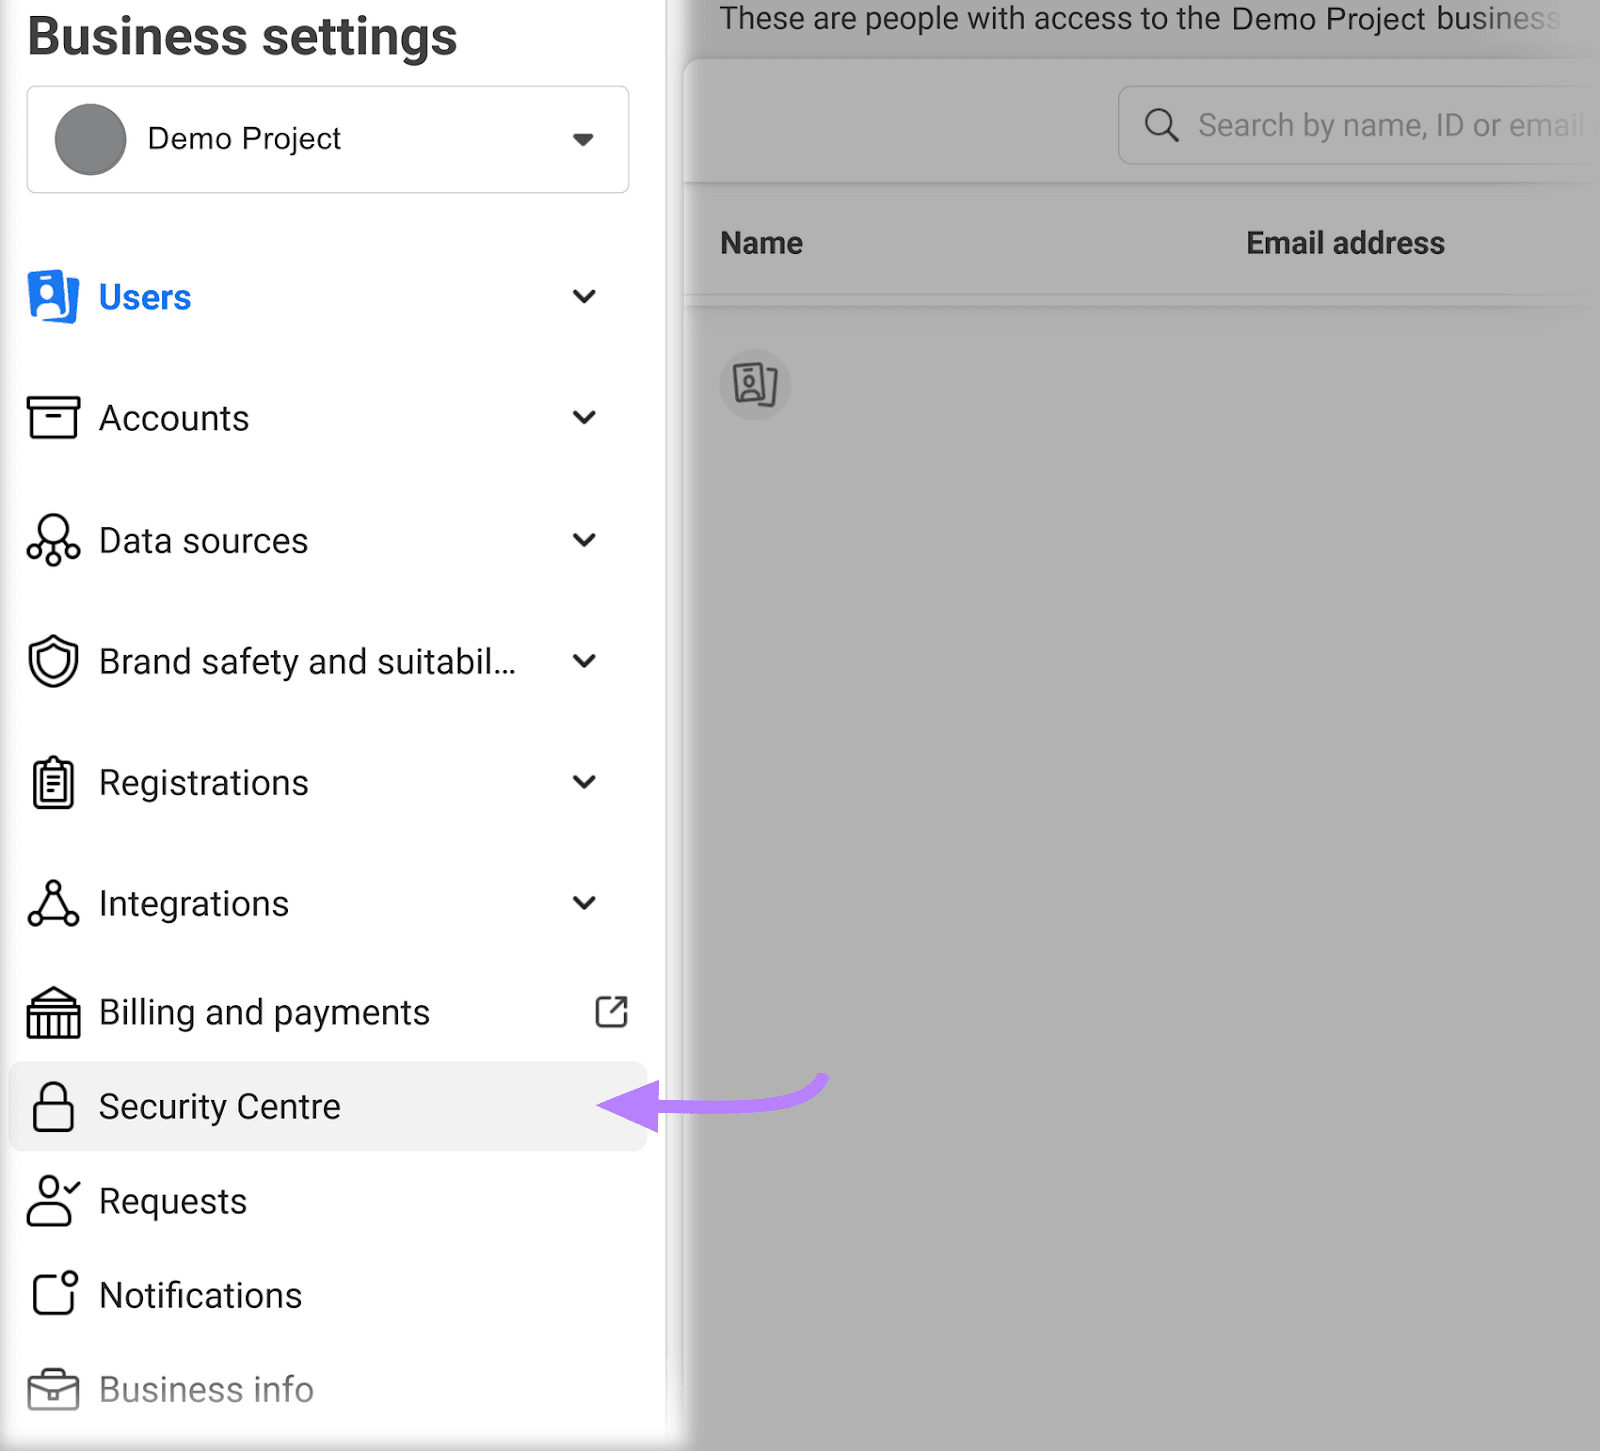 “Security Center" selected from the “Business settings" sidebar